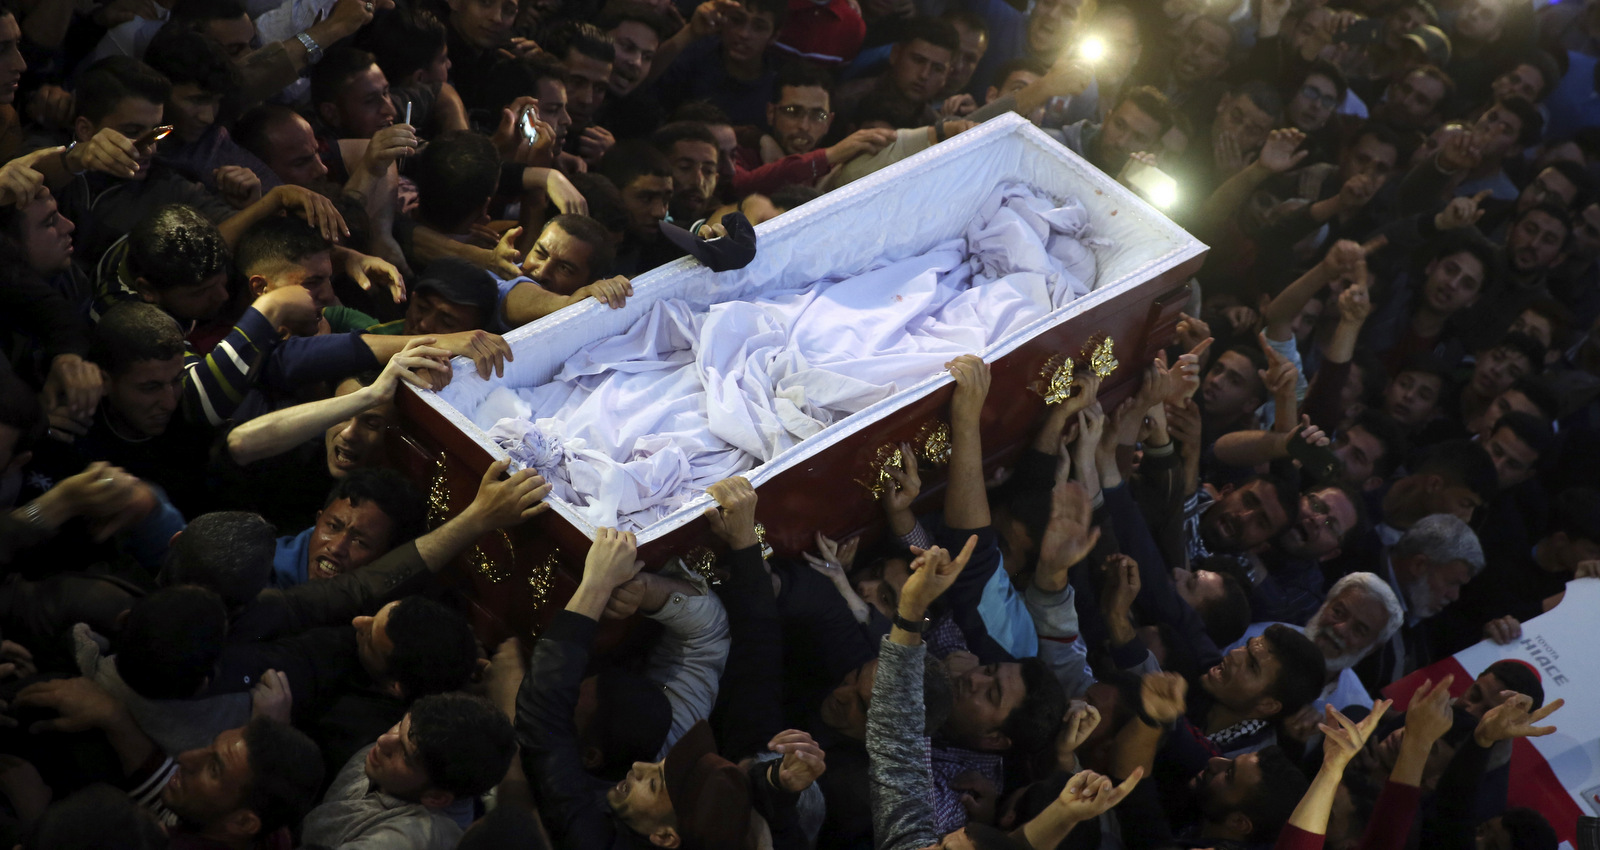 Mourners chant slogans while carry the coffin of Palestinian scientist Fadi al-Batsh, after his body crossed into the Gaza Strip from Egypt, during his funeral at Al Emari mosque in Jebaliya on Thursday, April 26, 2018. The body of the Hamas engineer who was gunned down in Malaysia last week was returned for burial. (AP Photo/Adel Hana)